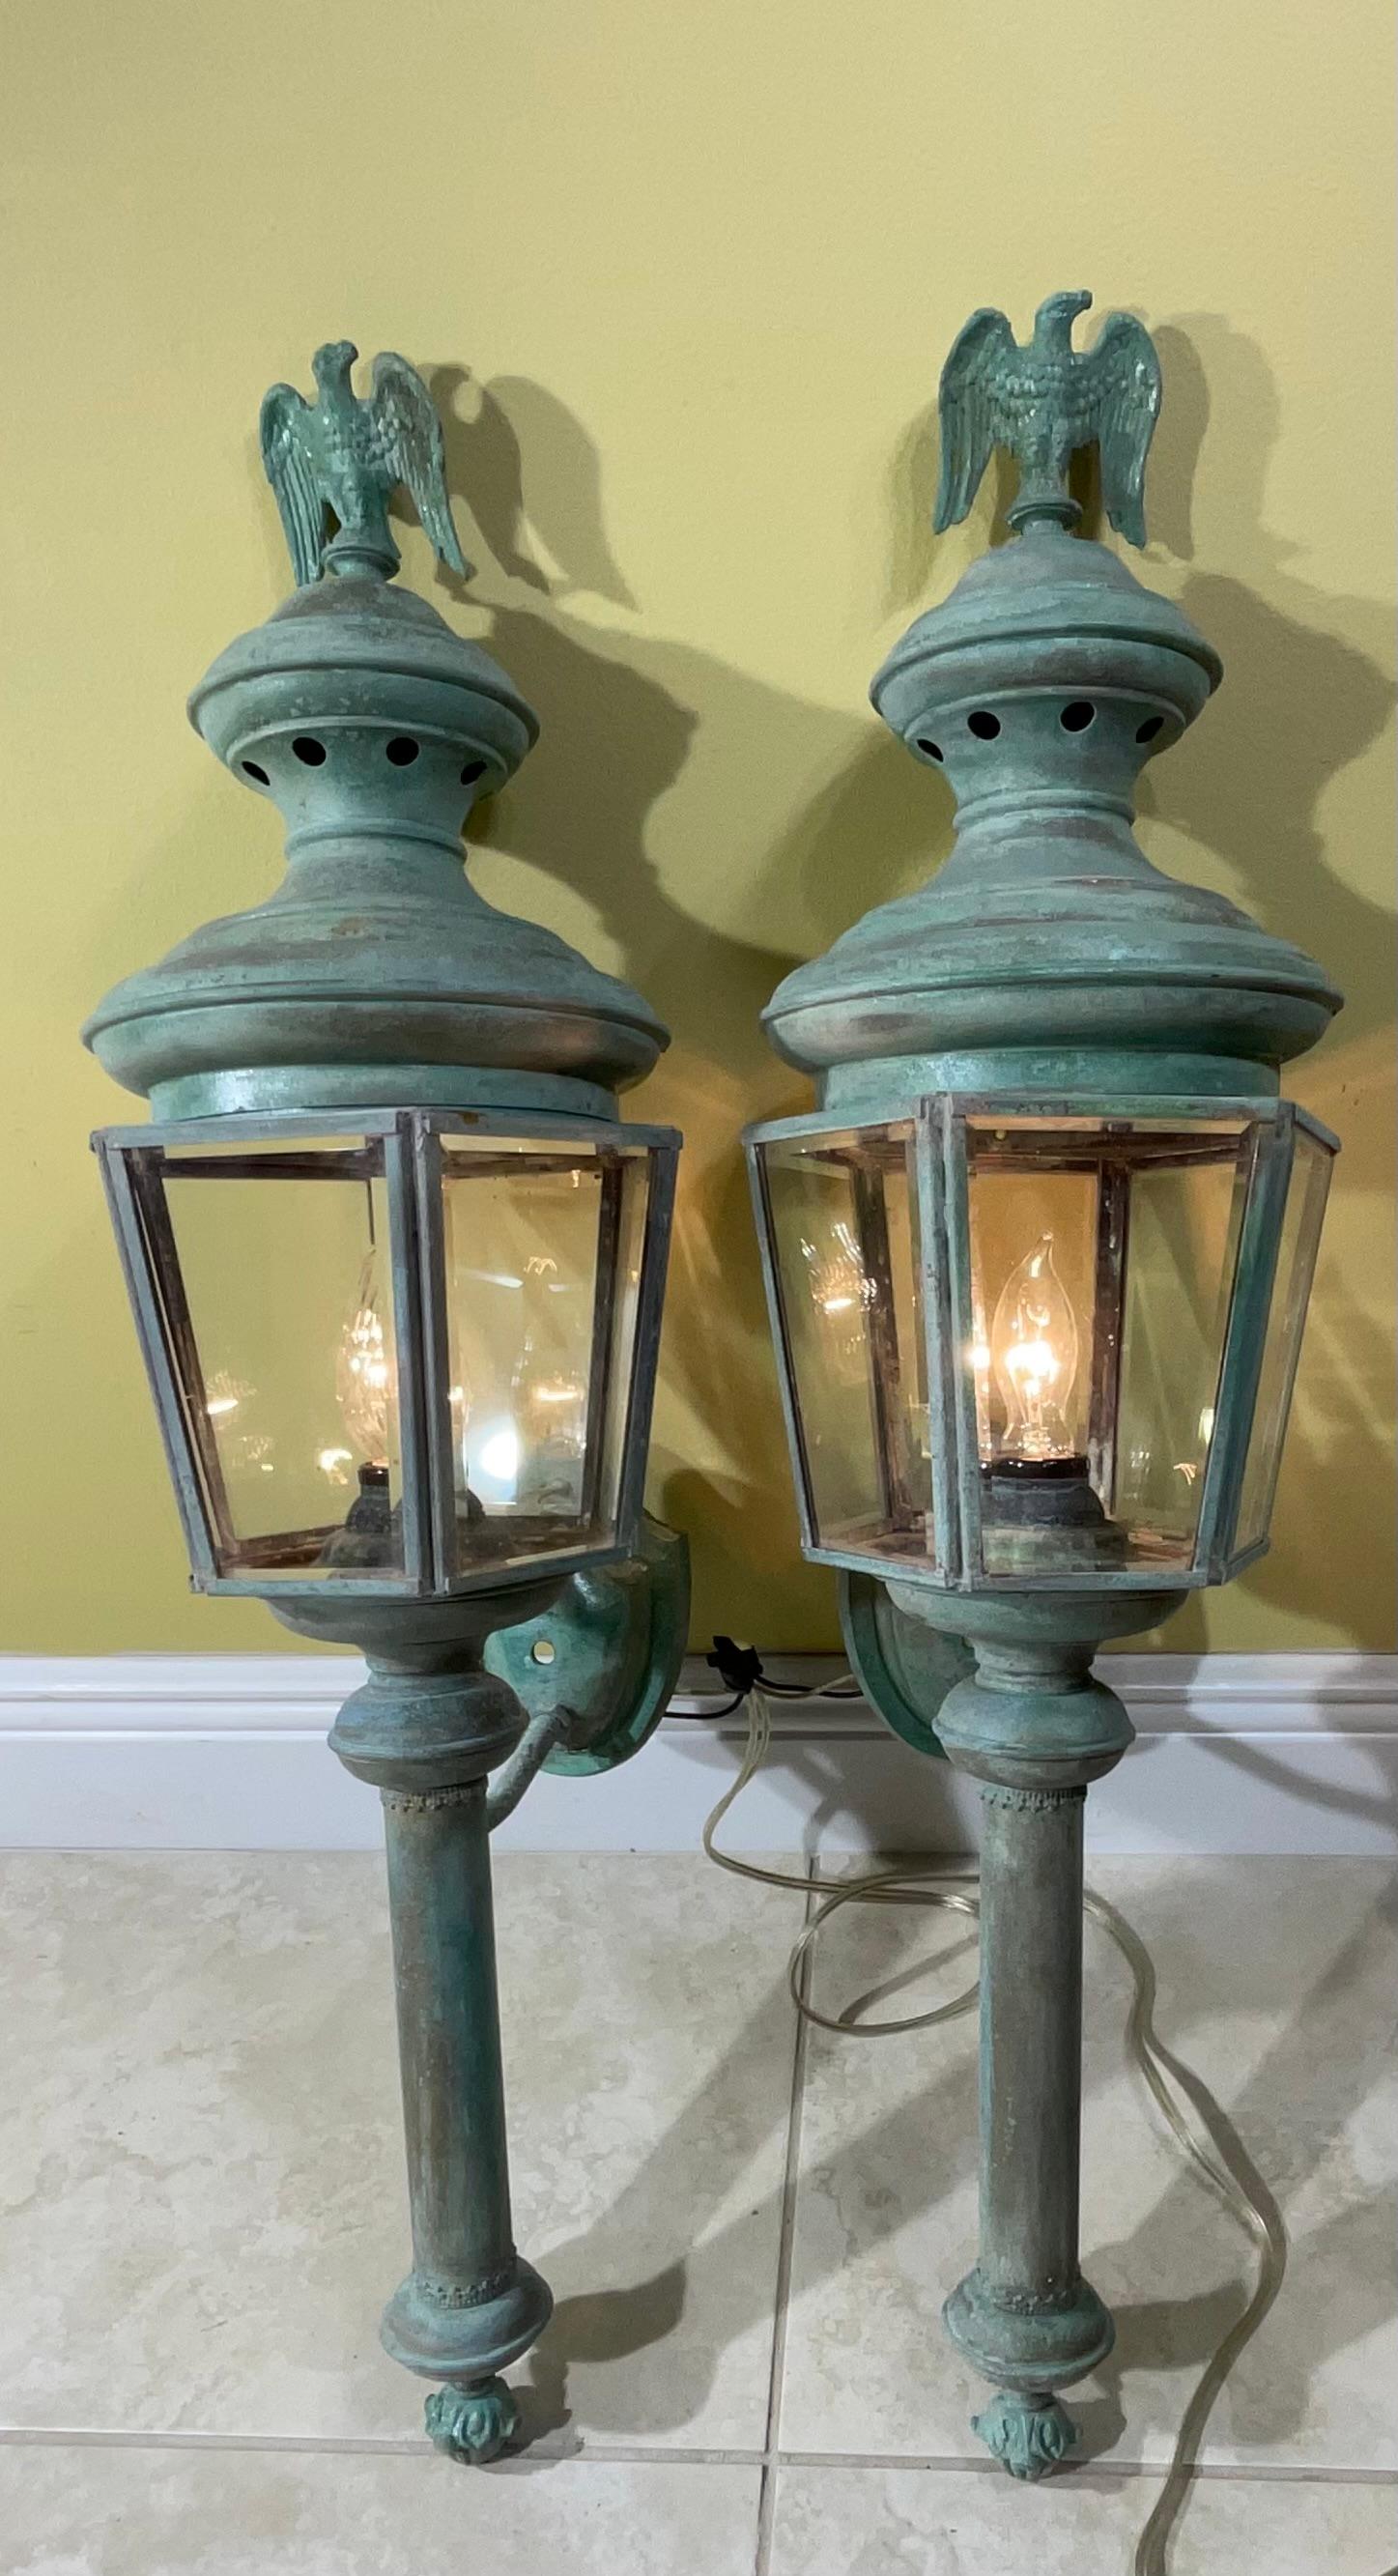 
Pair of elegant coach style wall light sconces, beautiful bevelled glass with decorative brass eagle finials , solid strong back plate, and nice looking original age brass patina .
Backplate size : 4”.75 x 6”.5